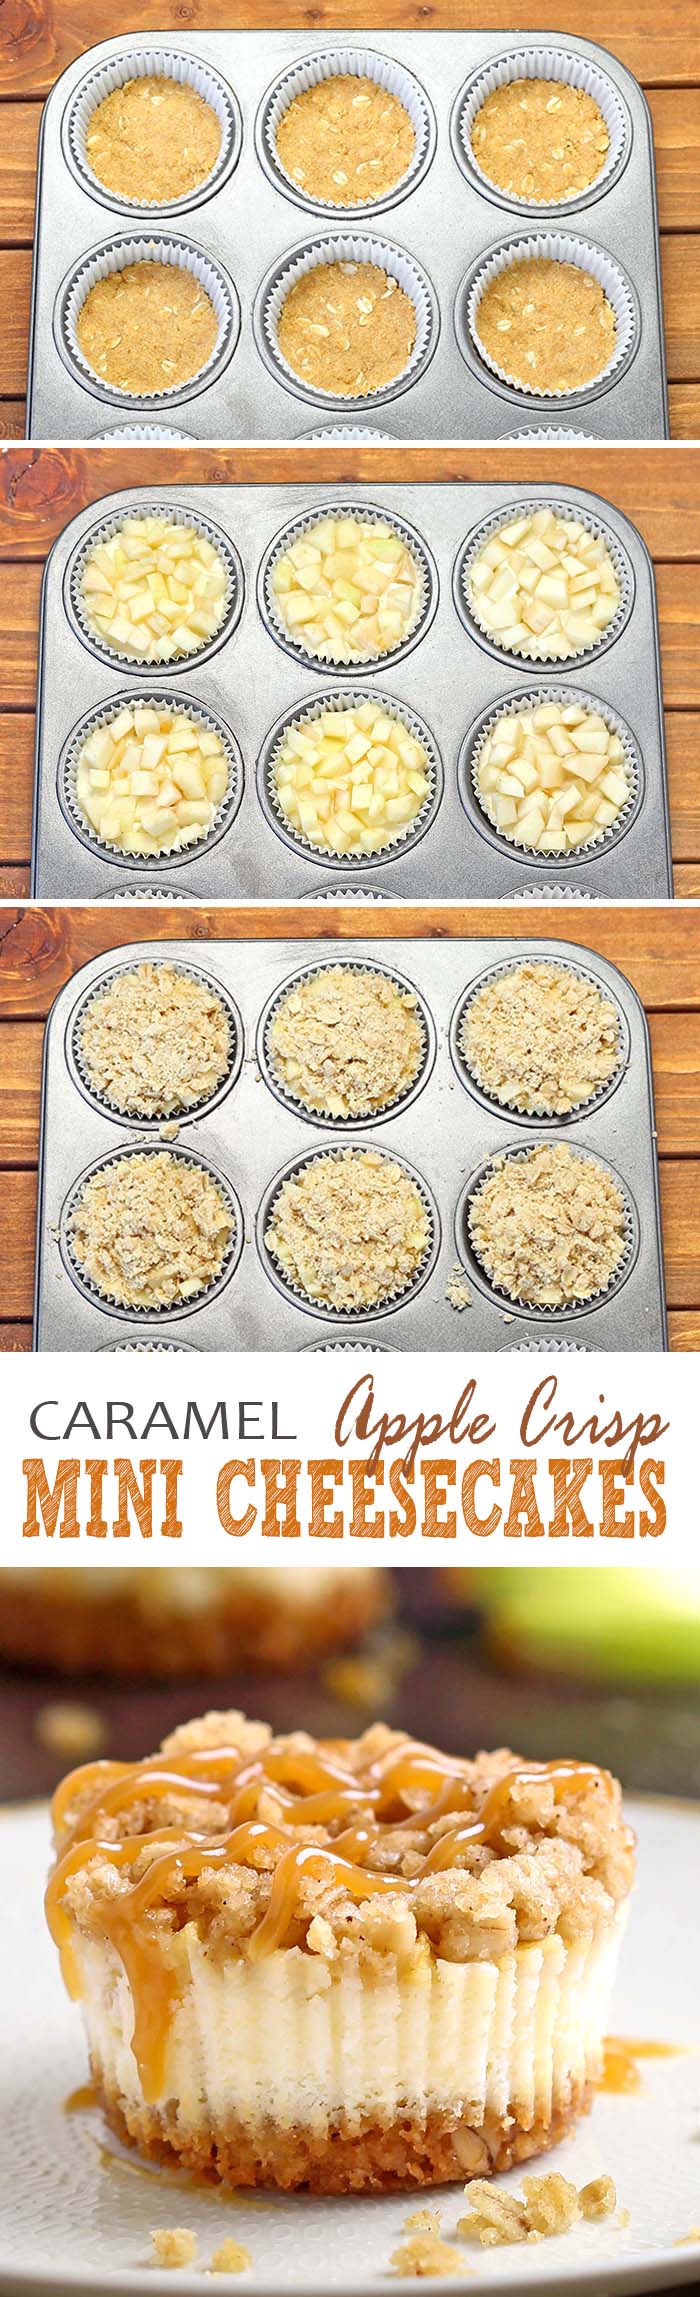 All of the sweet and caramely goodness of a traditional apple crisp, baked on graham cracker crust cheesecake packed into perfect portable fall dessert – Caramel Apple Crisp Mini Cheesecakes.